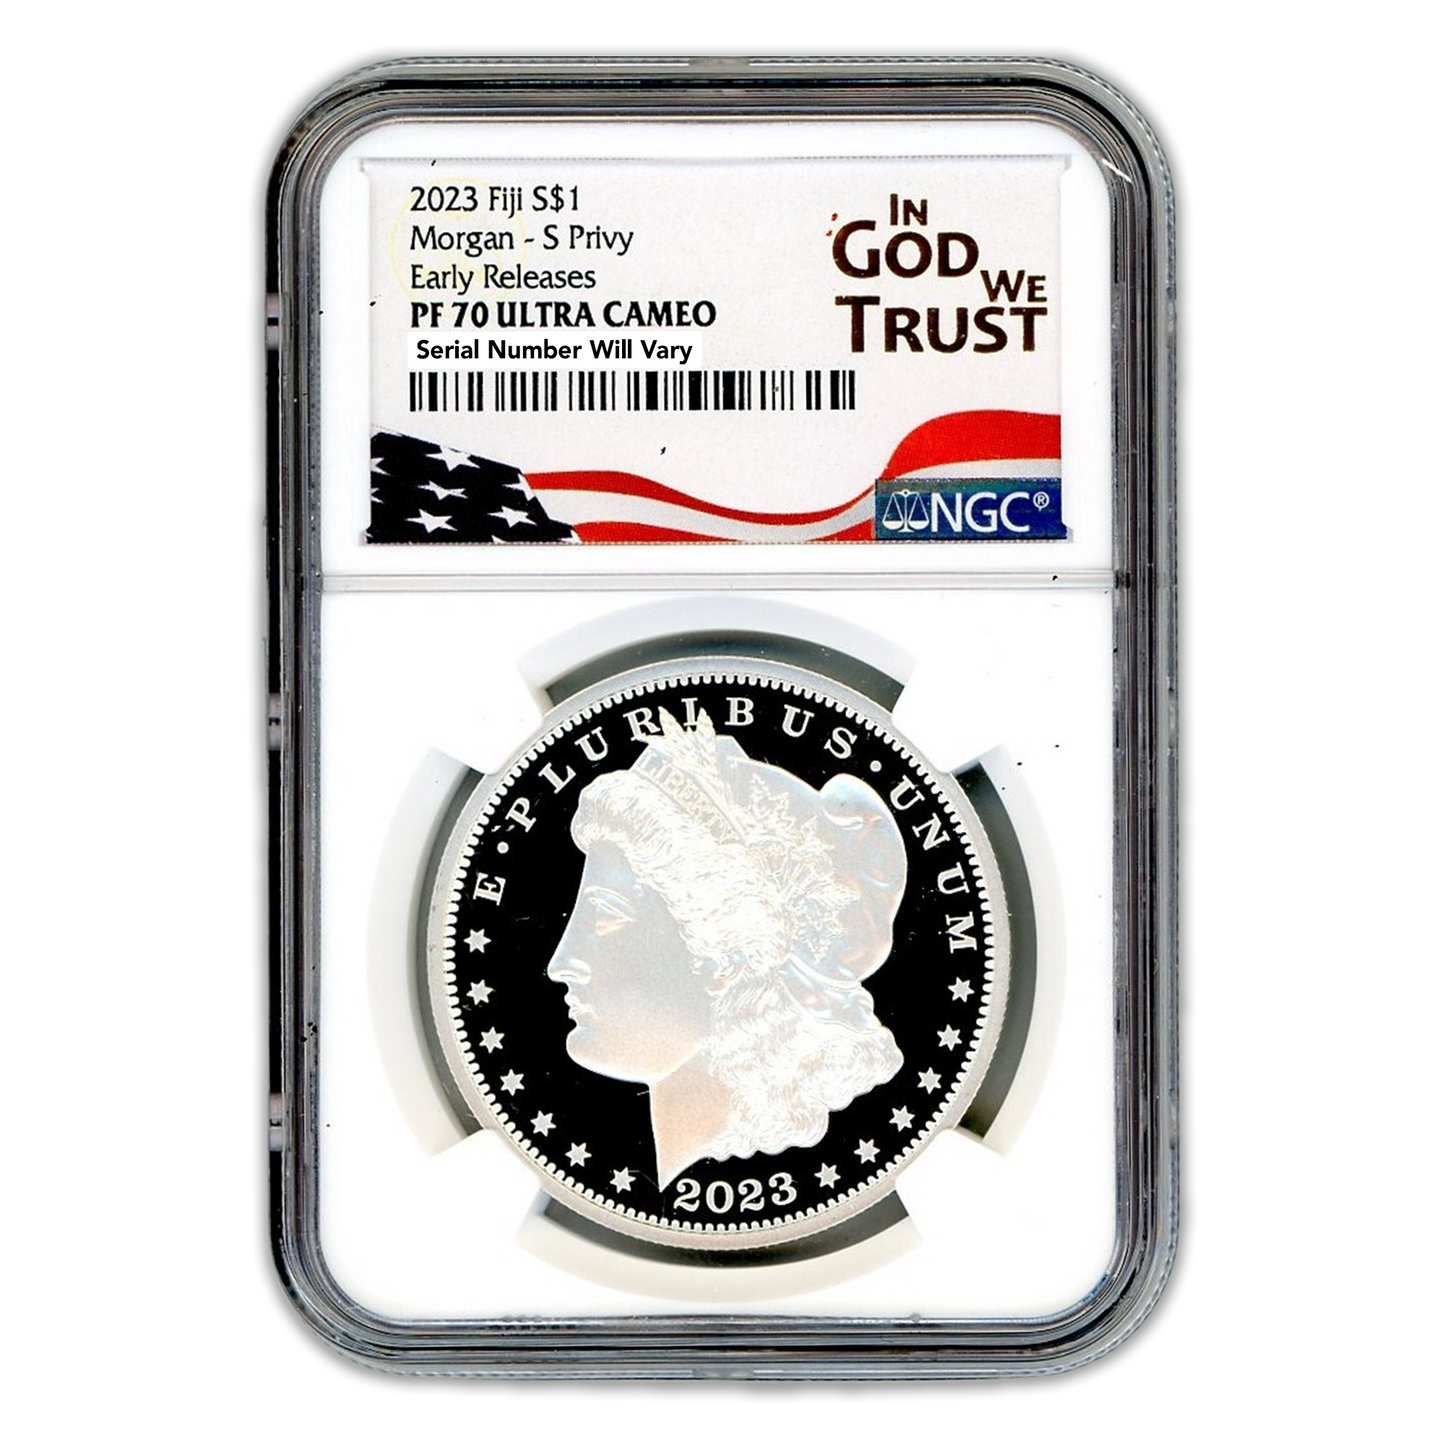 2023-S Morgan $1 Fiji Silver Tribute - NGC In God We Trust Label PF70 Ultra Cameo Early Release